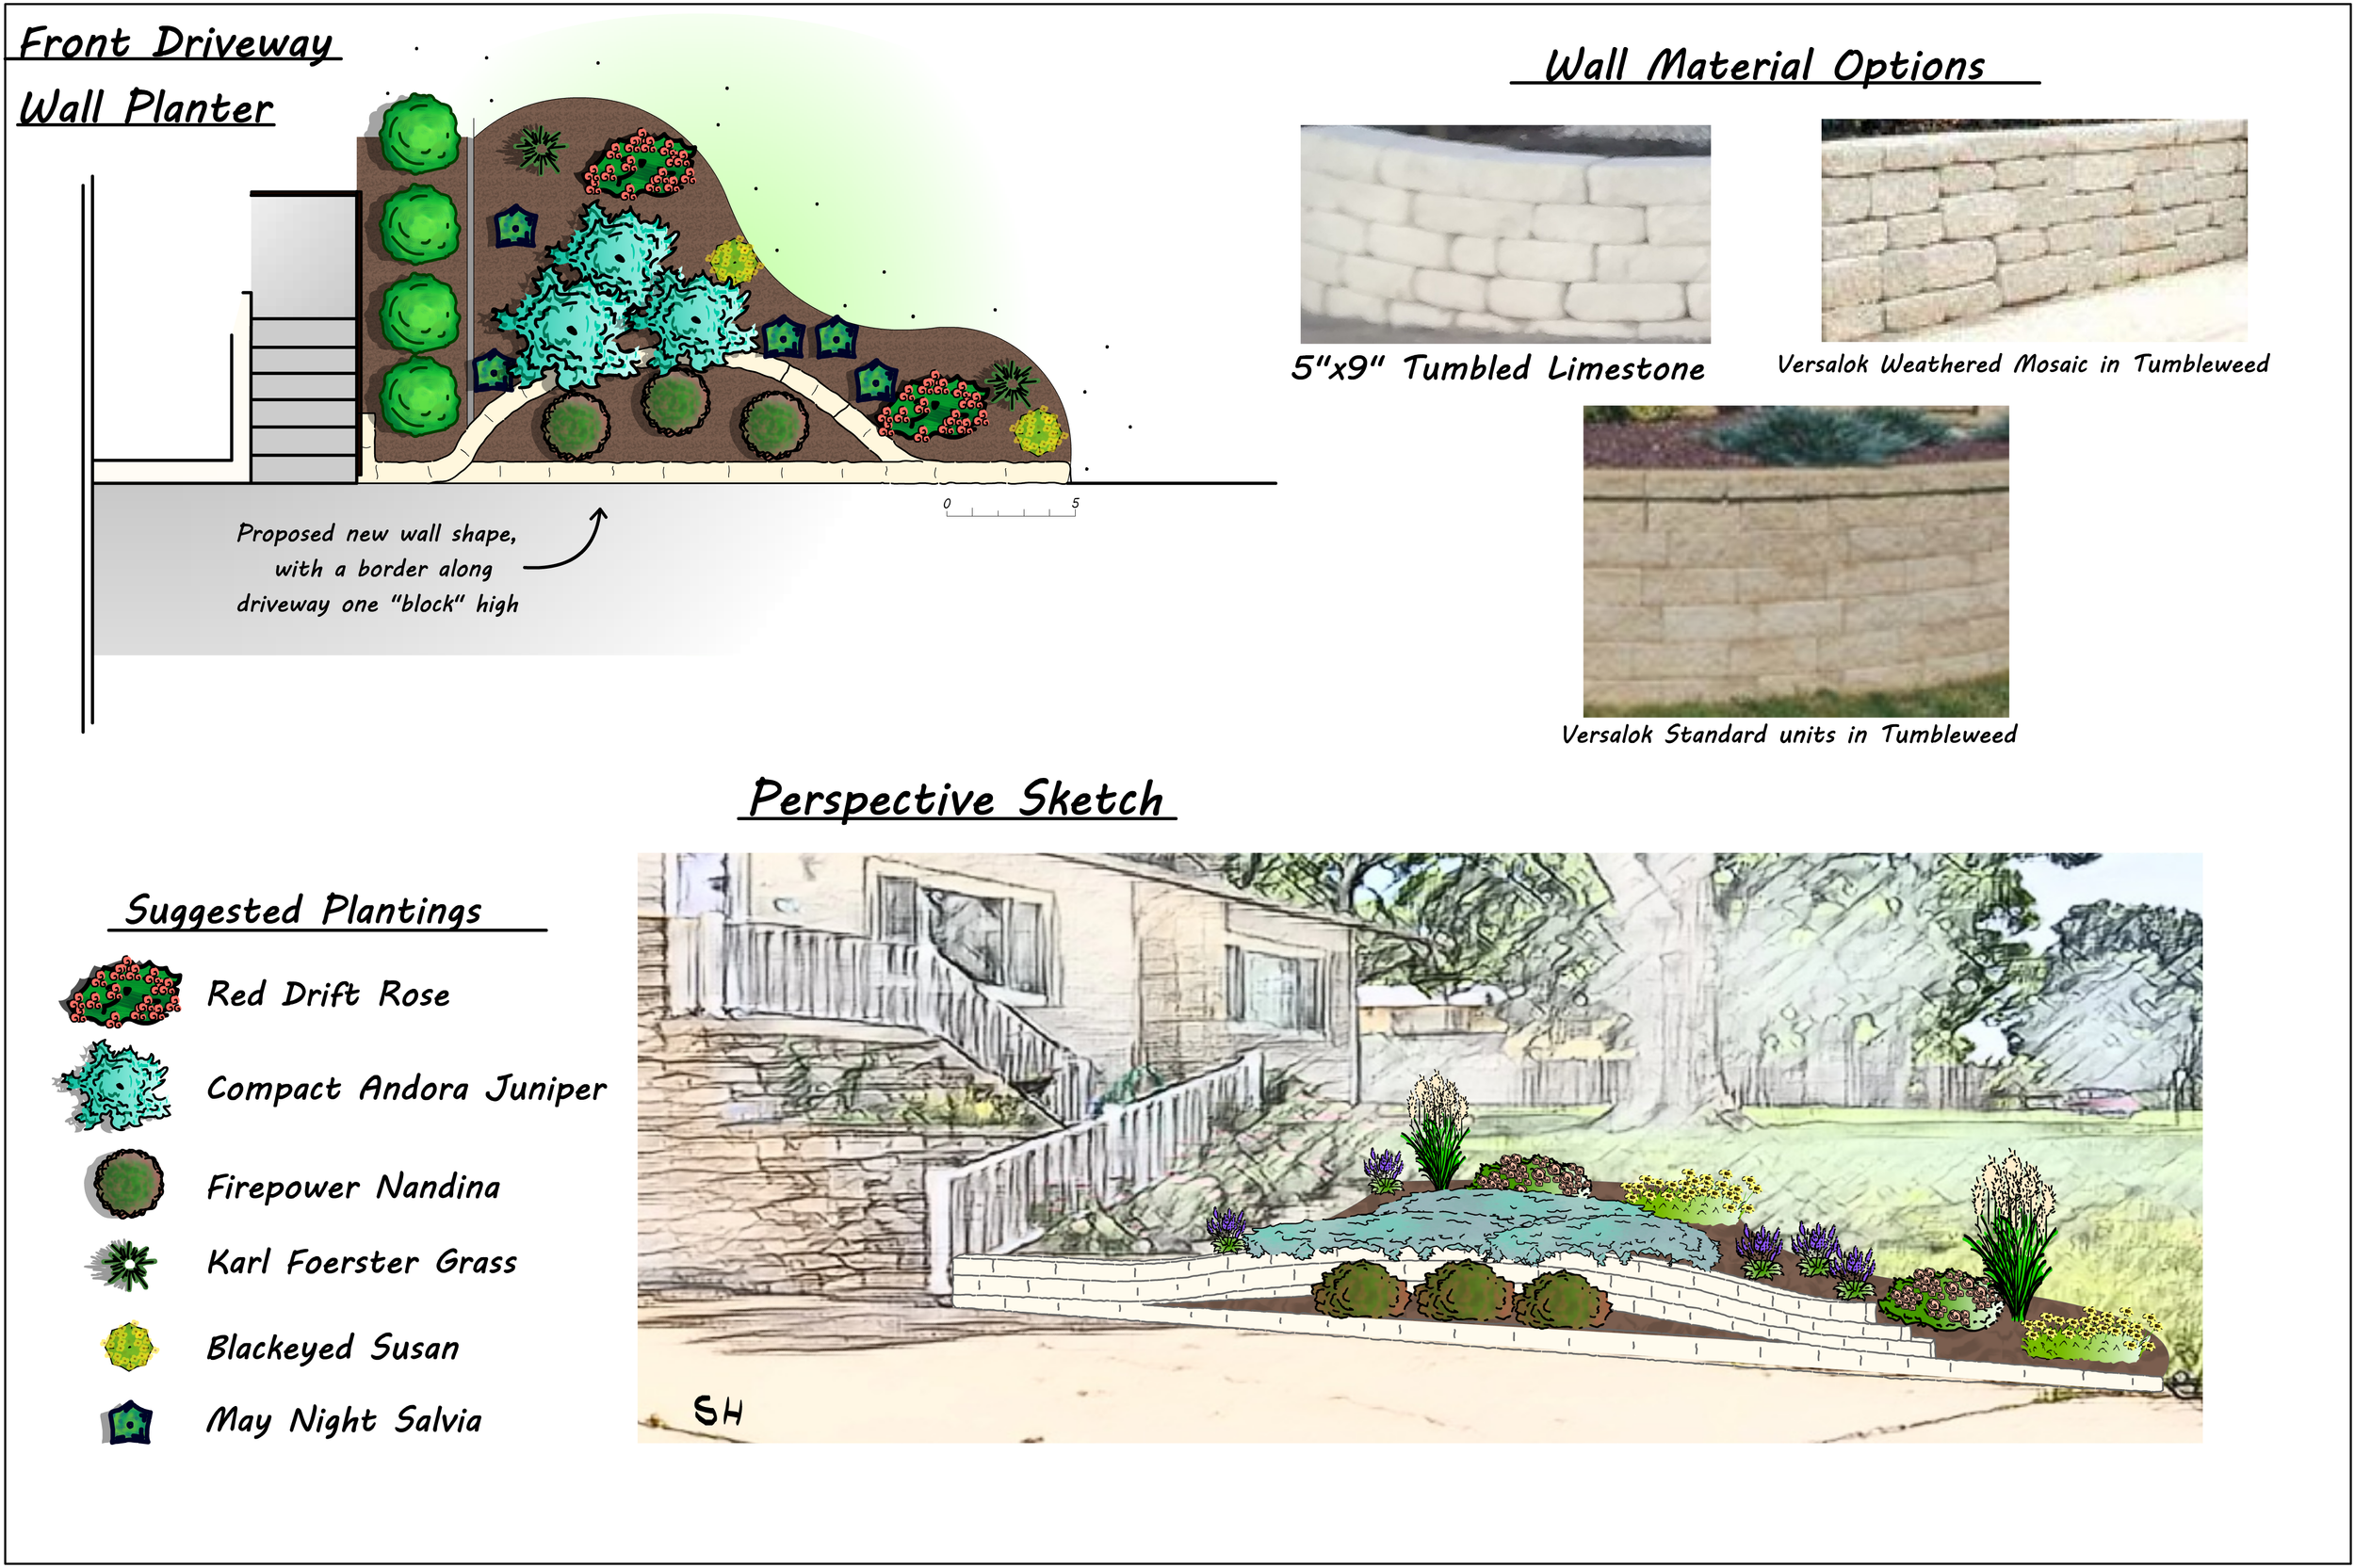 Front Driveway Wall Planter.png